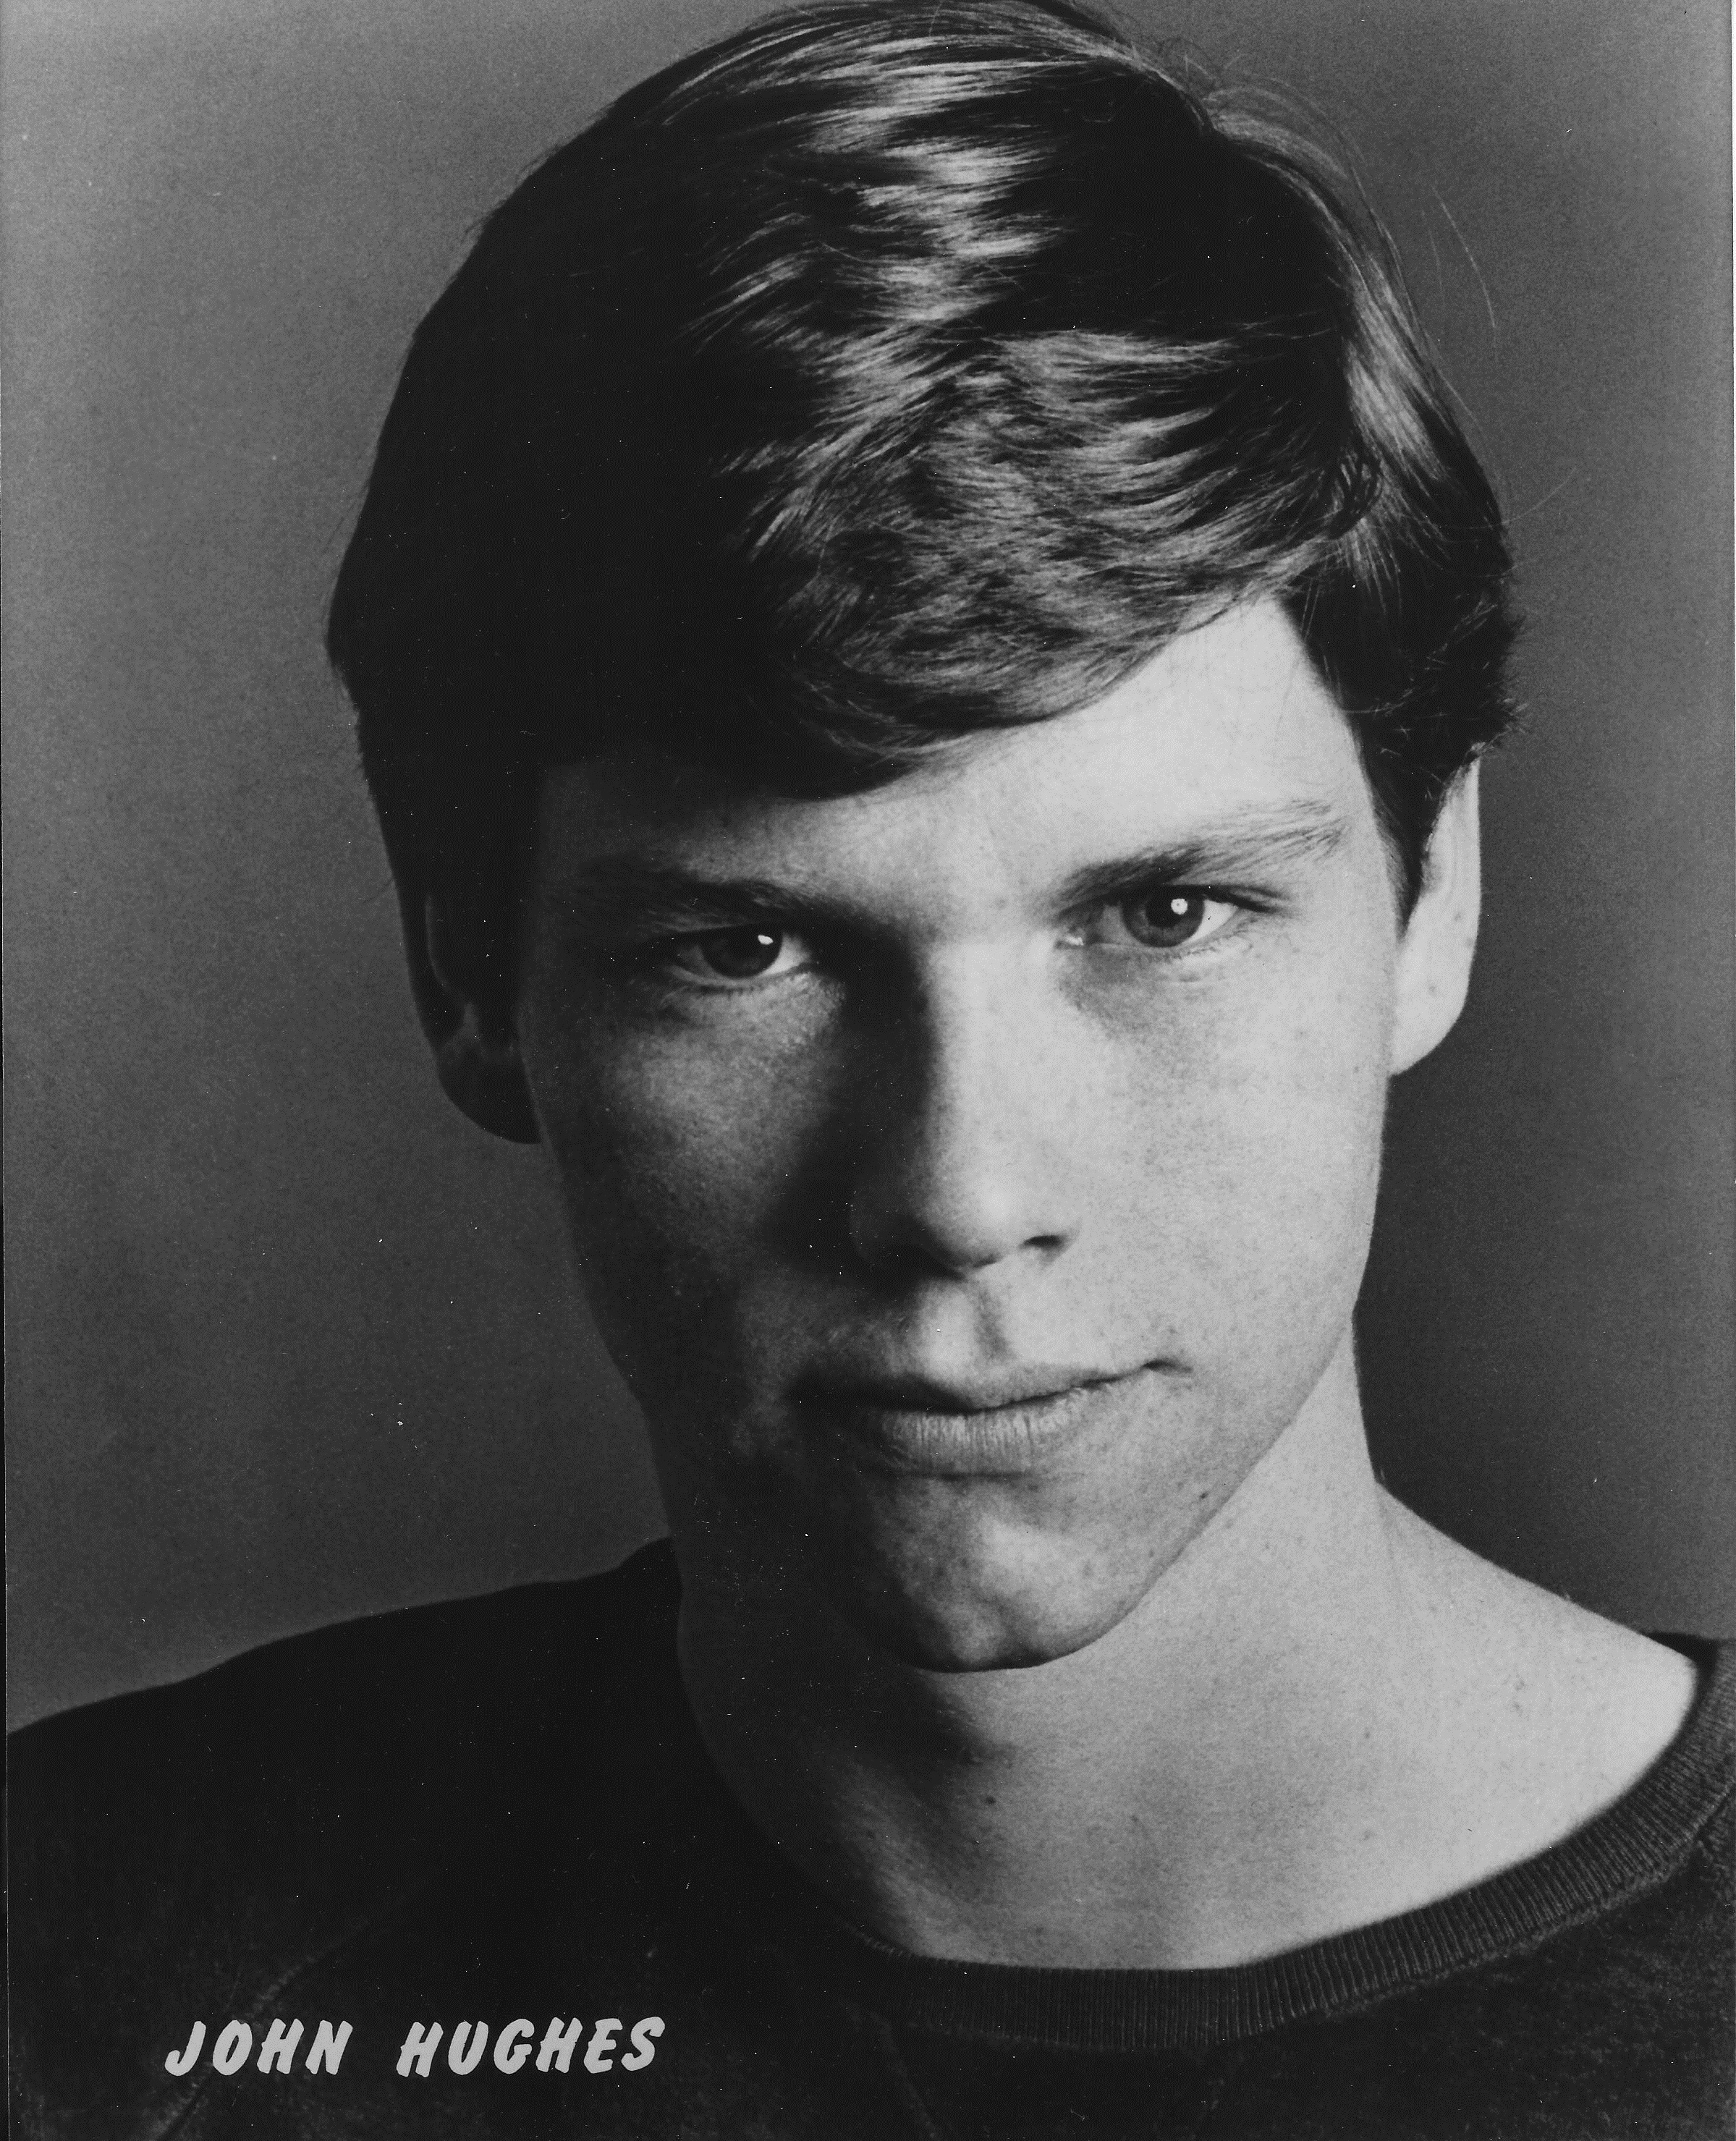 John Hughes (one of his first head shots before changing his name to Jackson) New York, NY